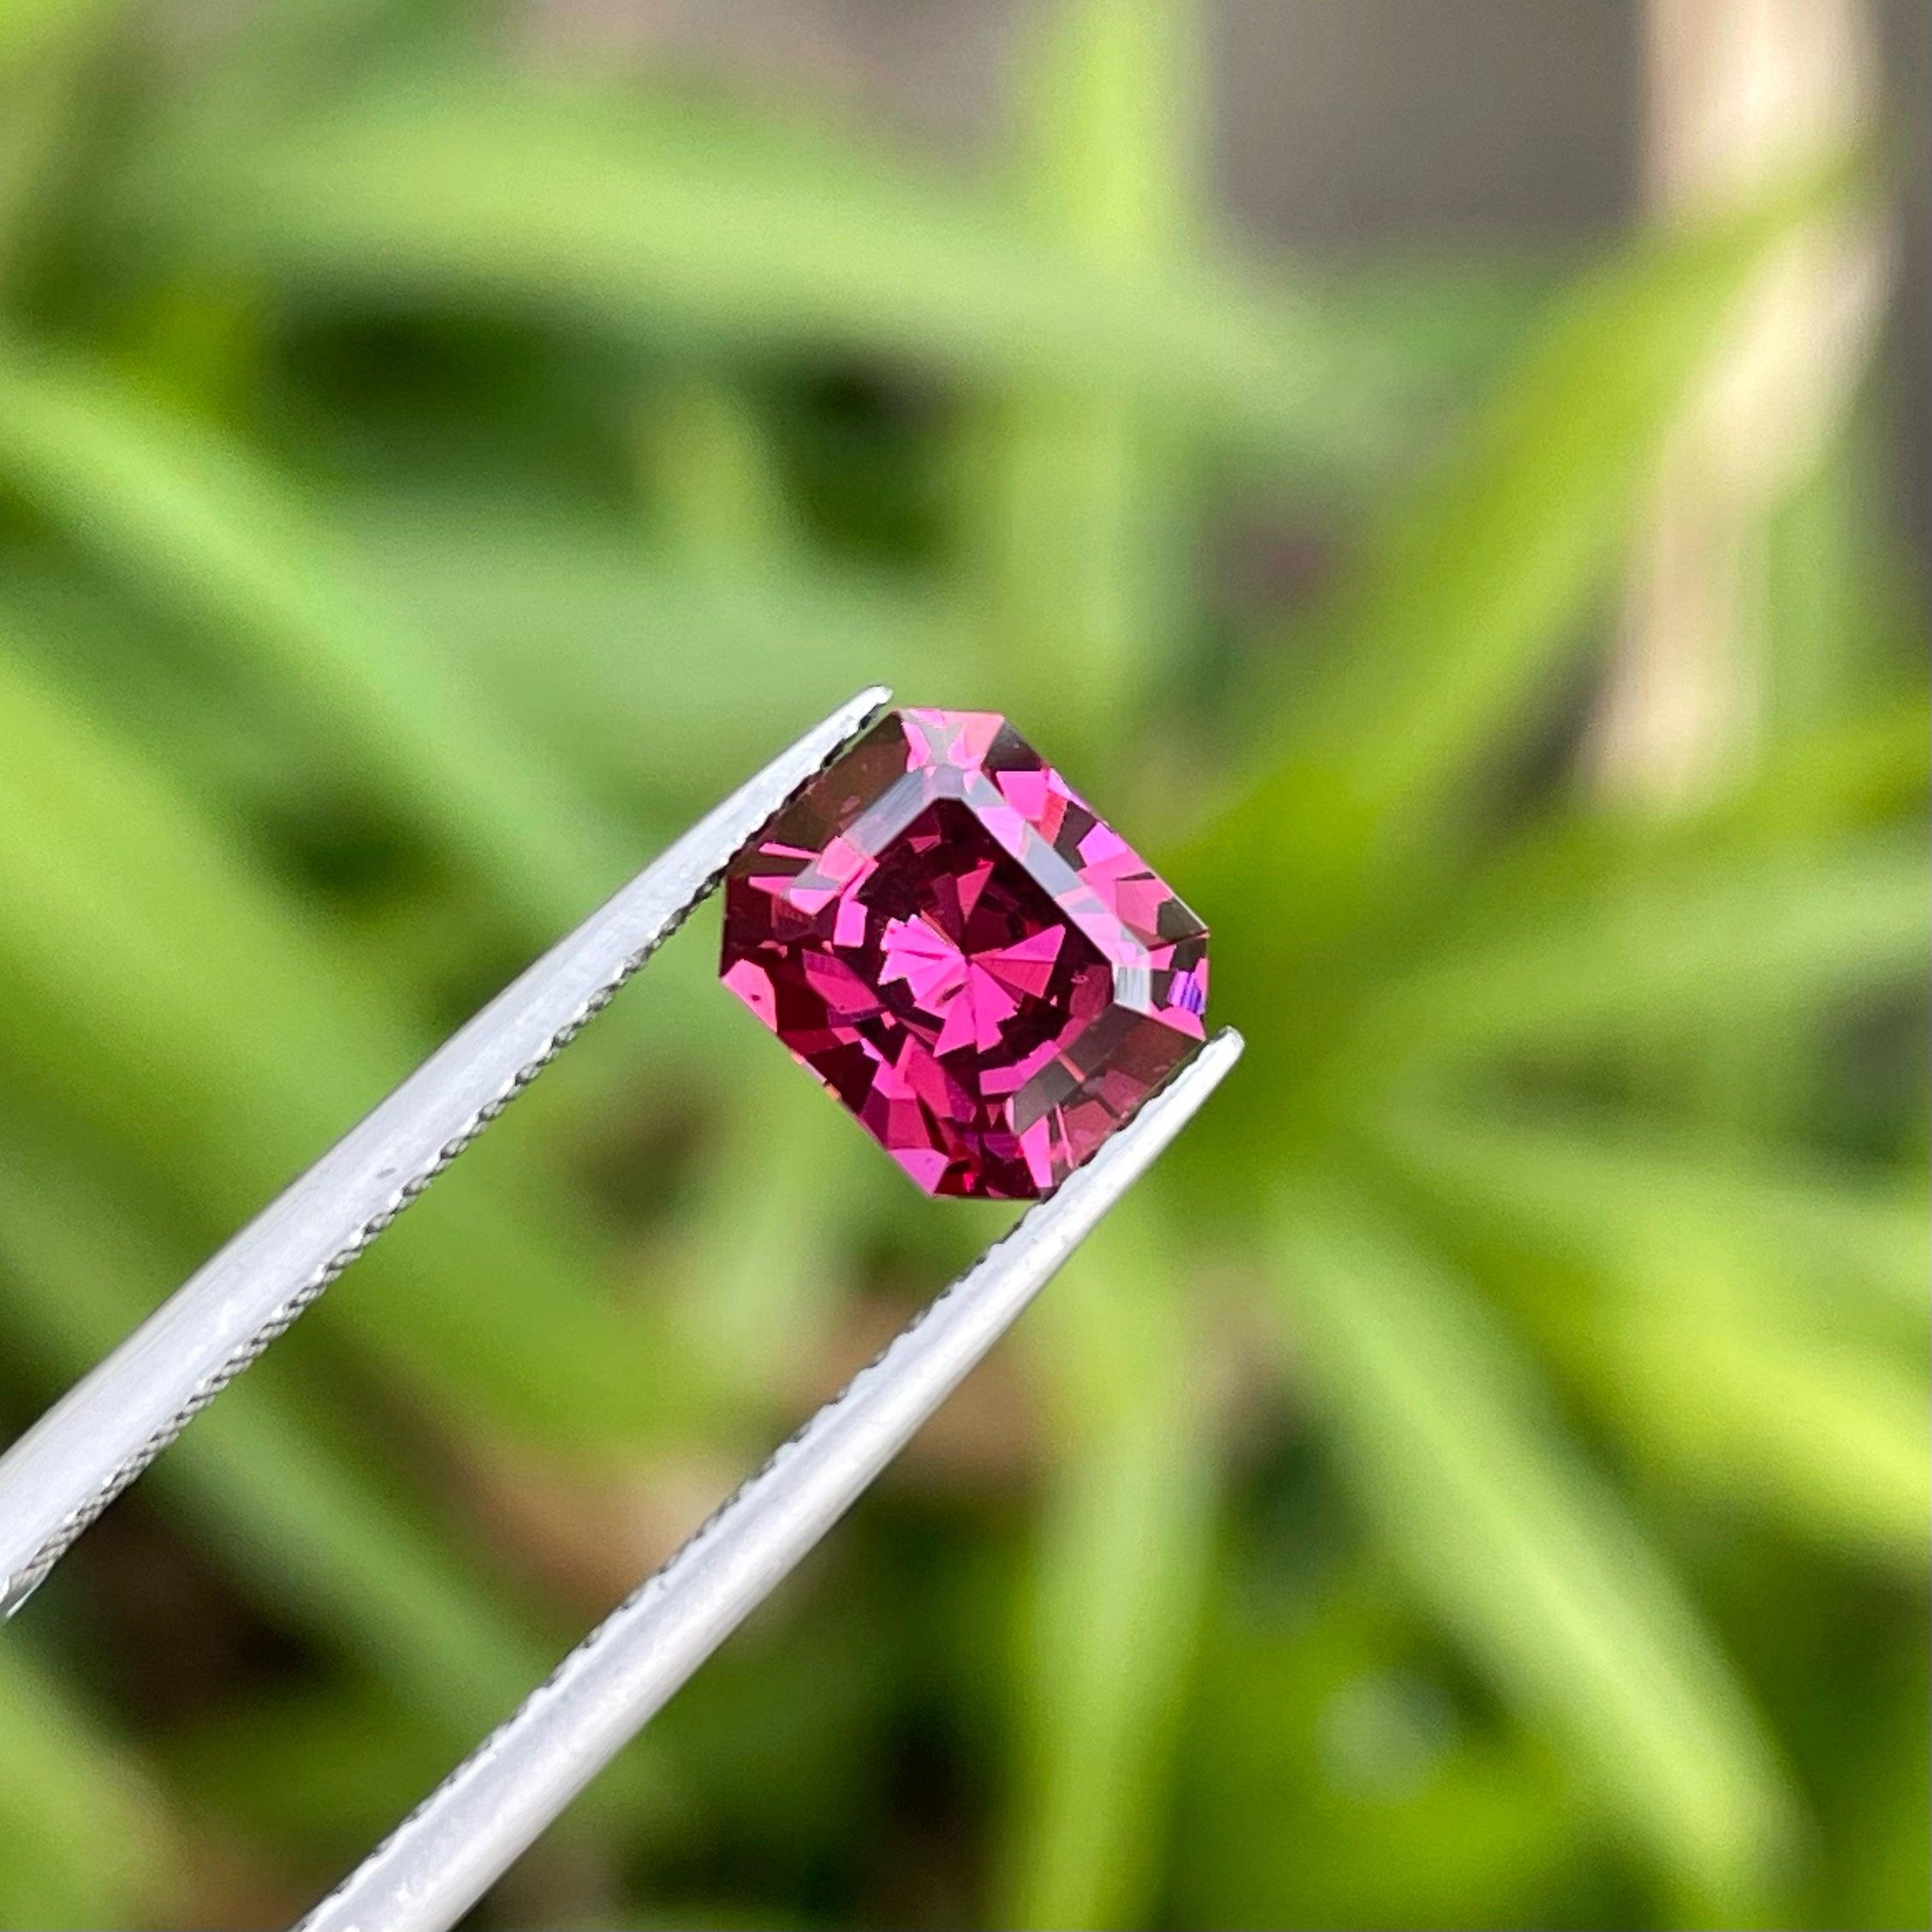 Natural Reddish Pink Malawi Garnet Stone of 2.0 carats from Malawi has a wonderful cut in a Octagon shape, Reddish Pink color, Great brilliance. This gem is VVS Clarity.

Product Information:
GEMSTONE NAME: Natural Reddish Pink Malawi Garnet